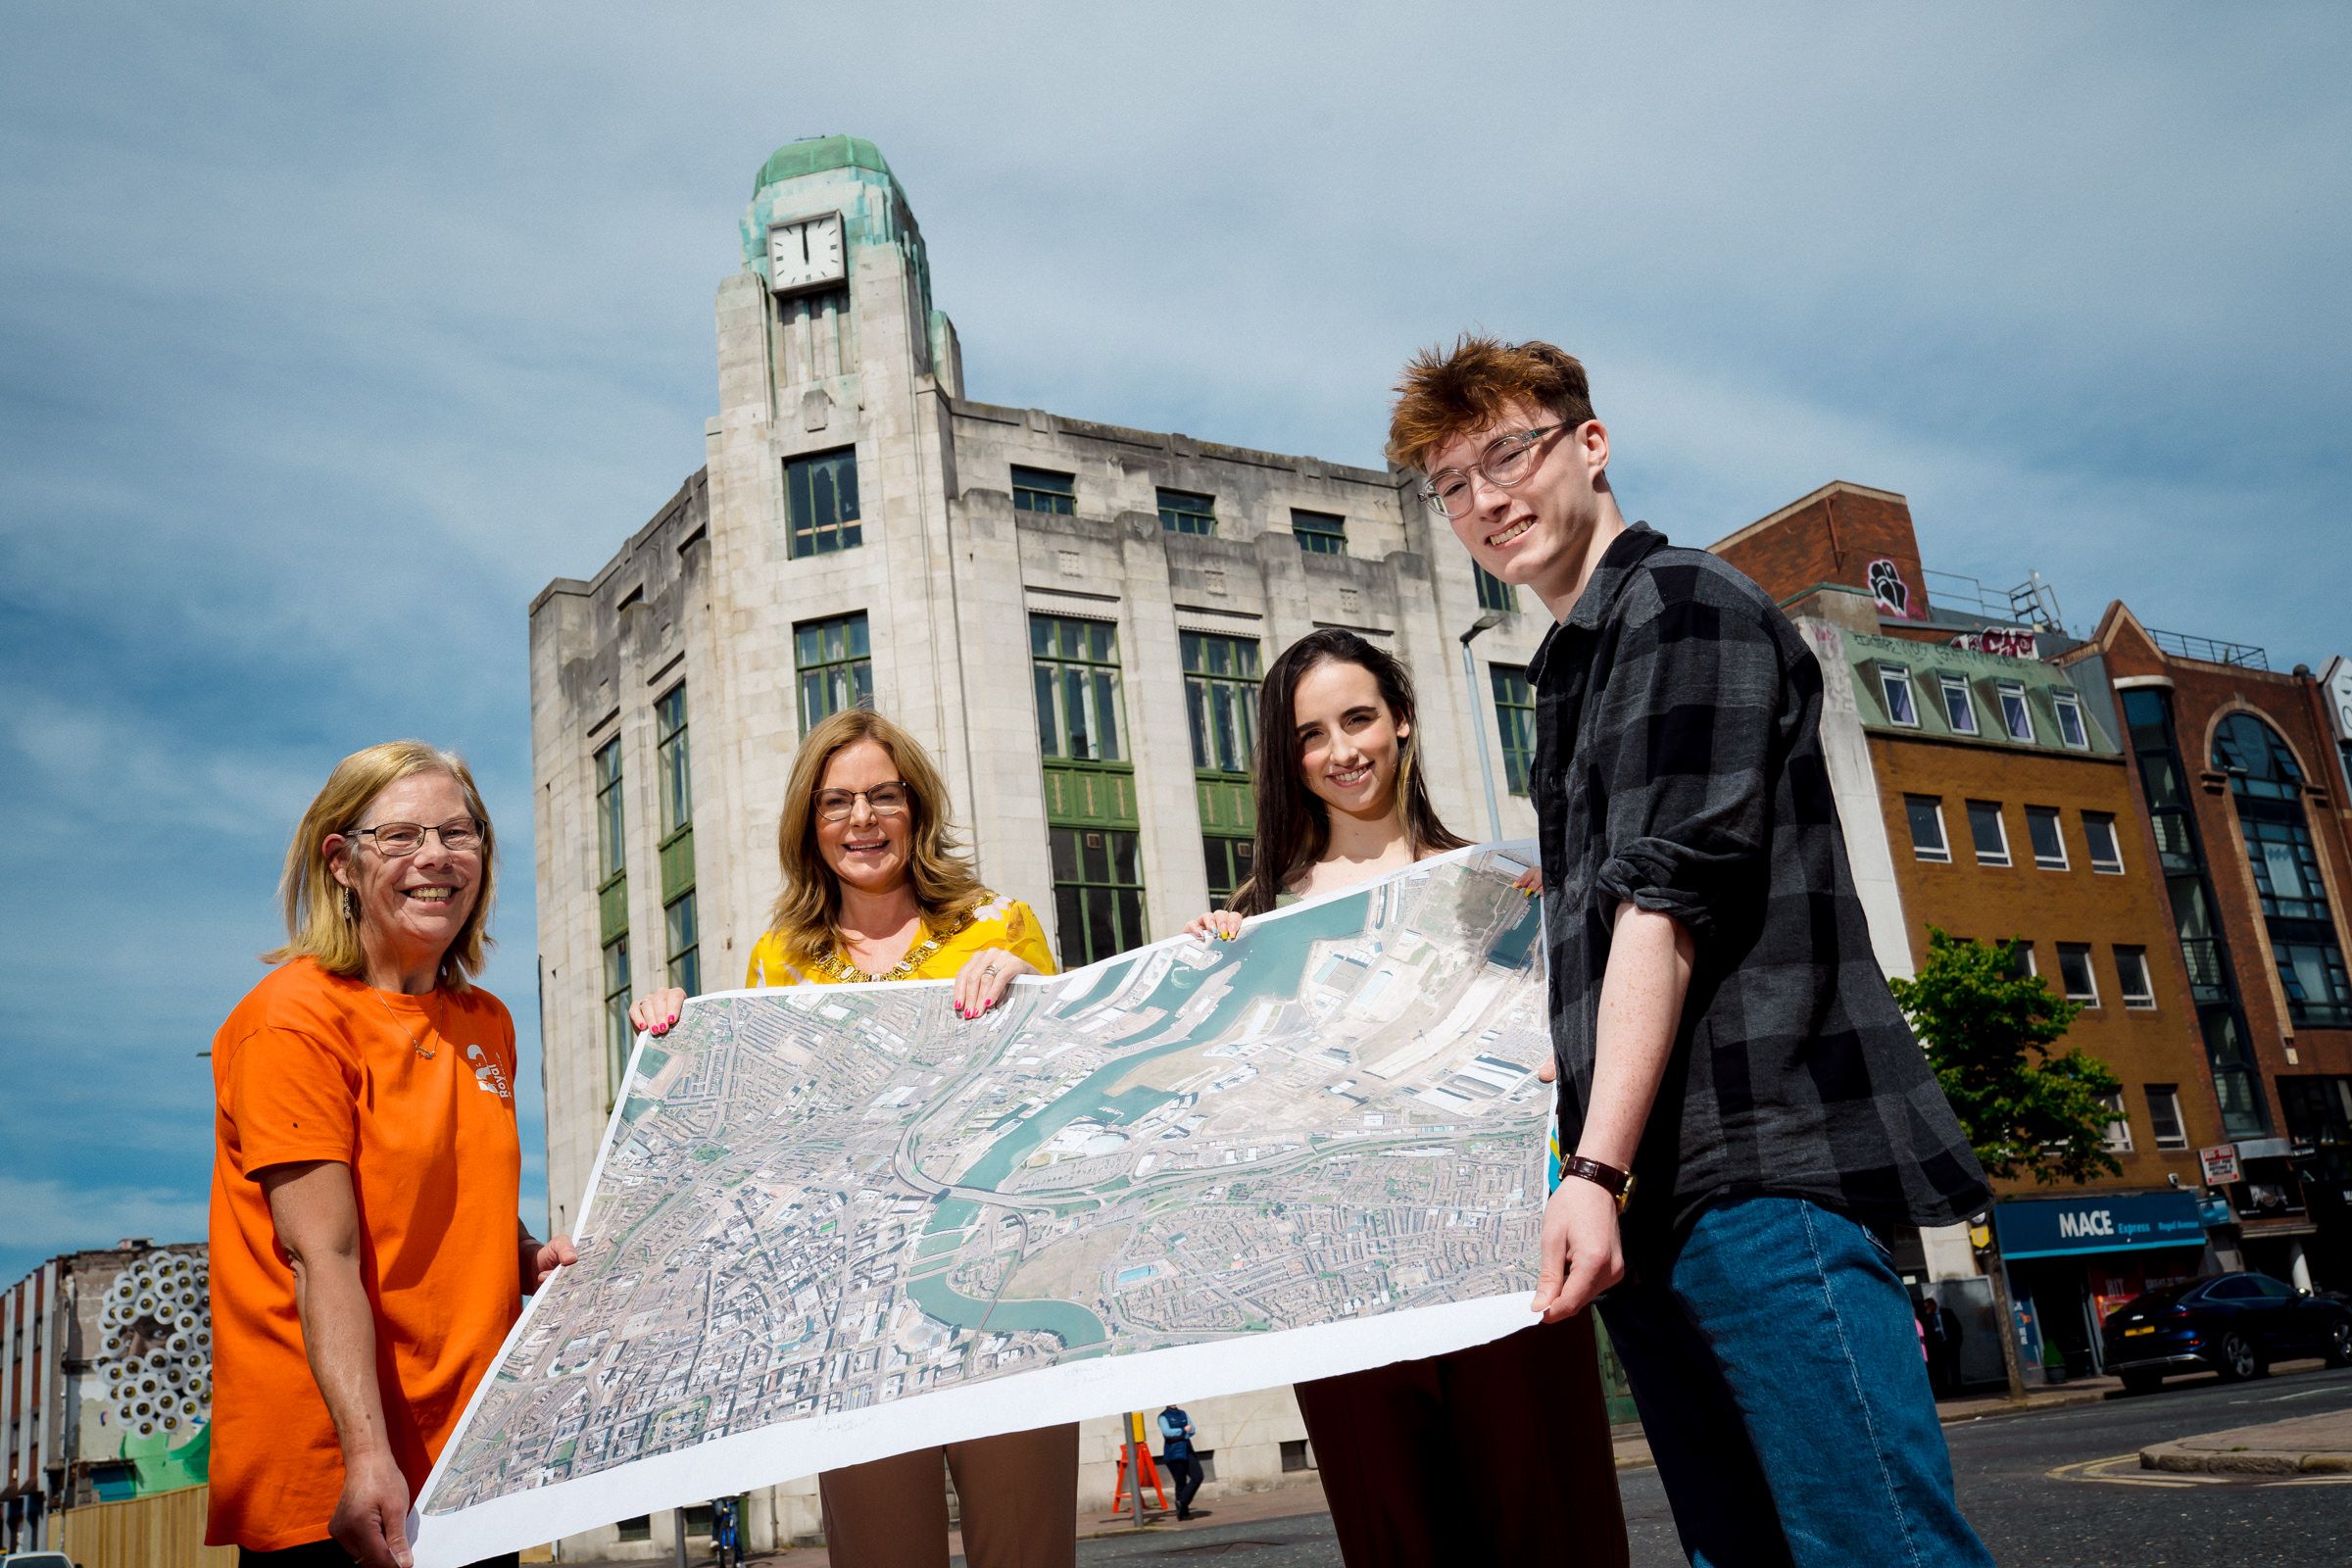 CONSULTATION: Lord Mayor of Belfast Councillor Tina Black launched the Belfast Stories public consultation today alongside Avril Hunter from MayWe Event Management and NI Screen Screenworks participants Jasmine McGimpsey and Eoin Campbell. 